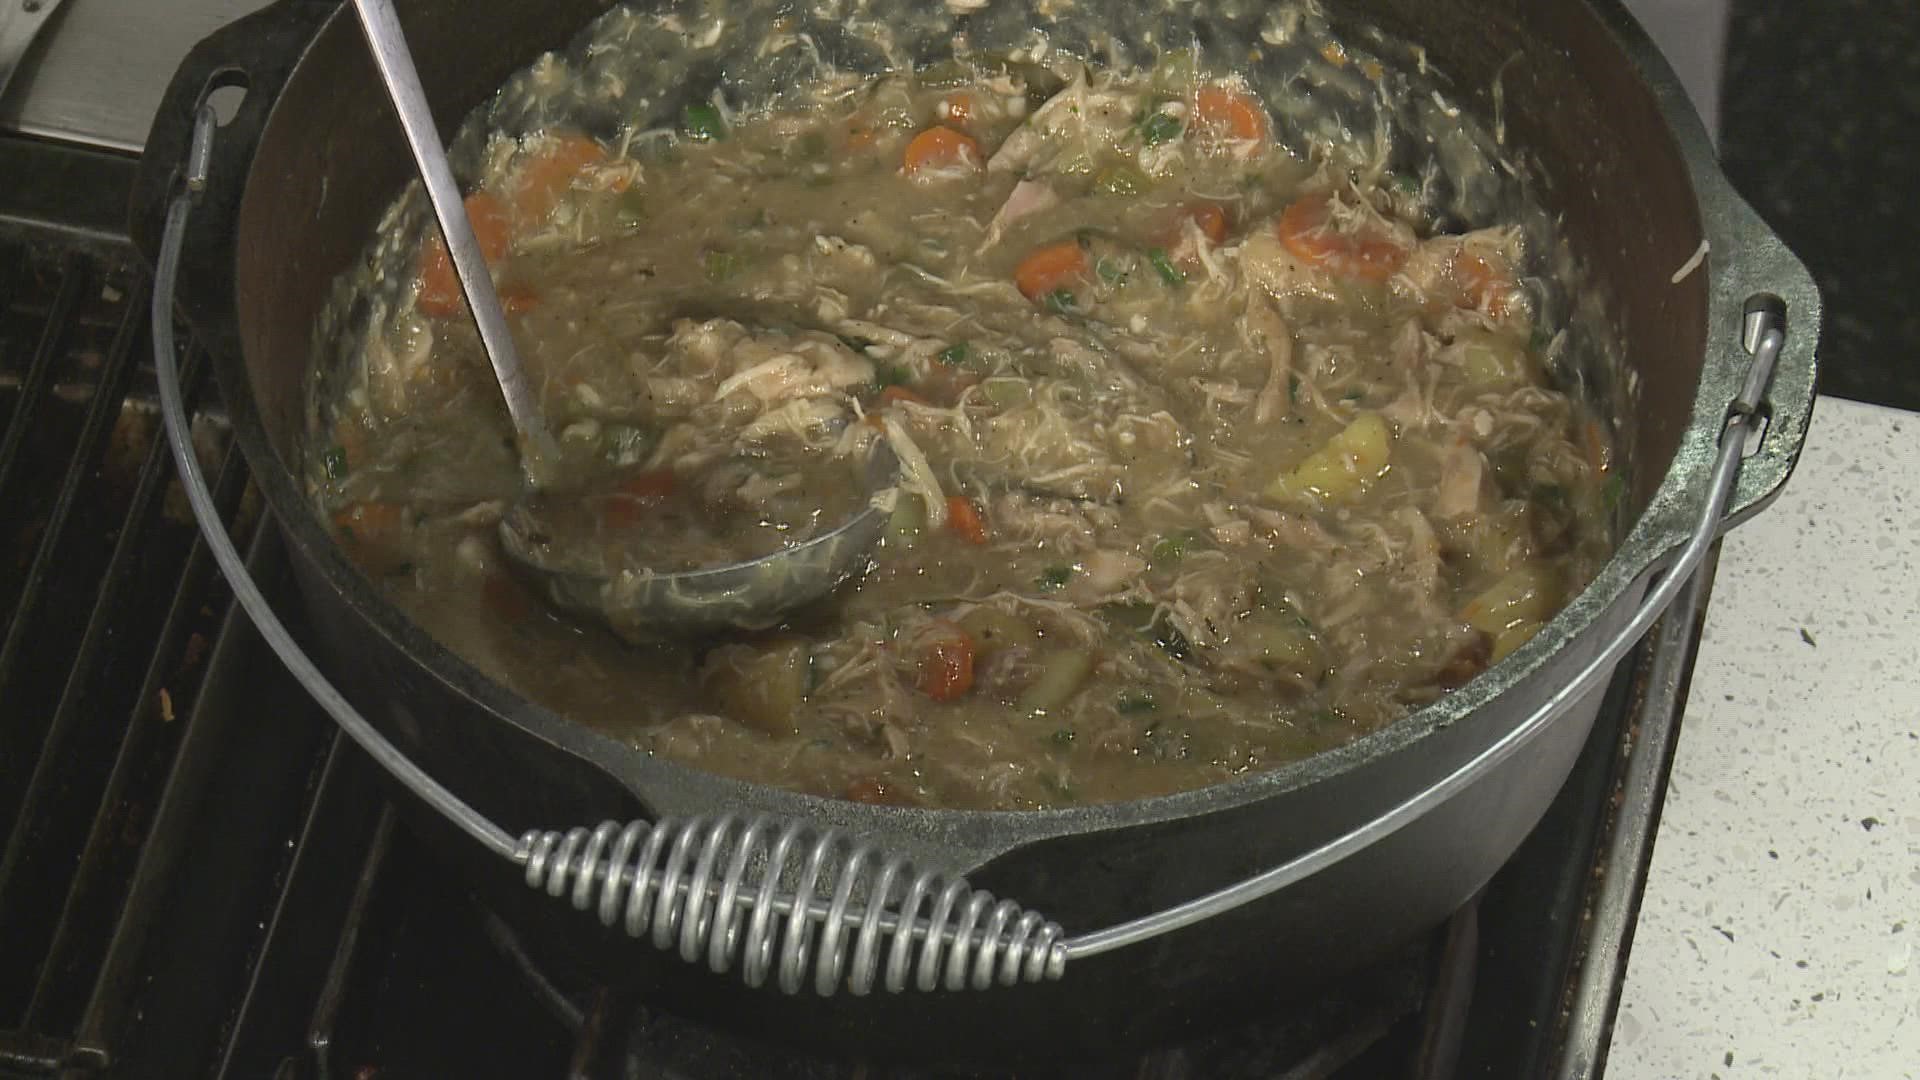 Chef Kevin cooks up some hot chicken stew for a cold day.